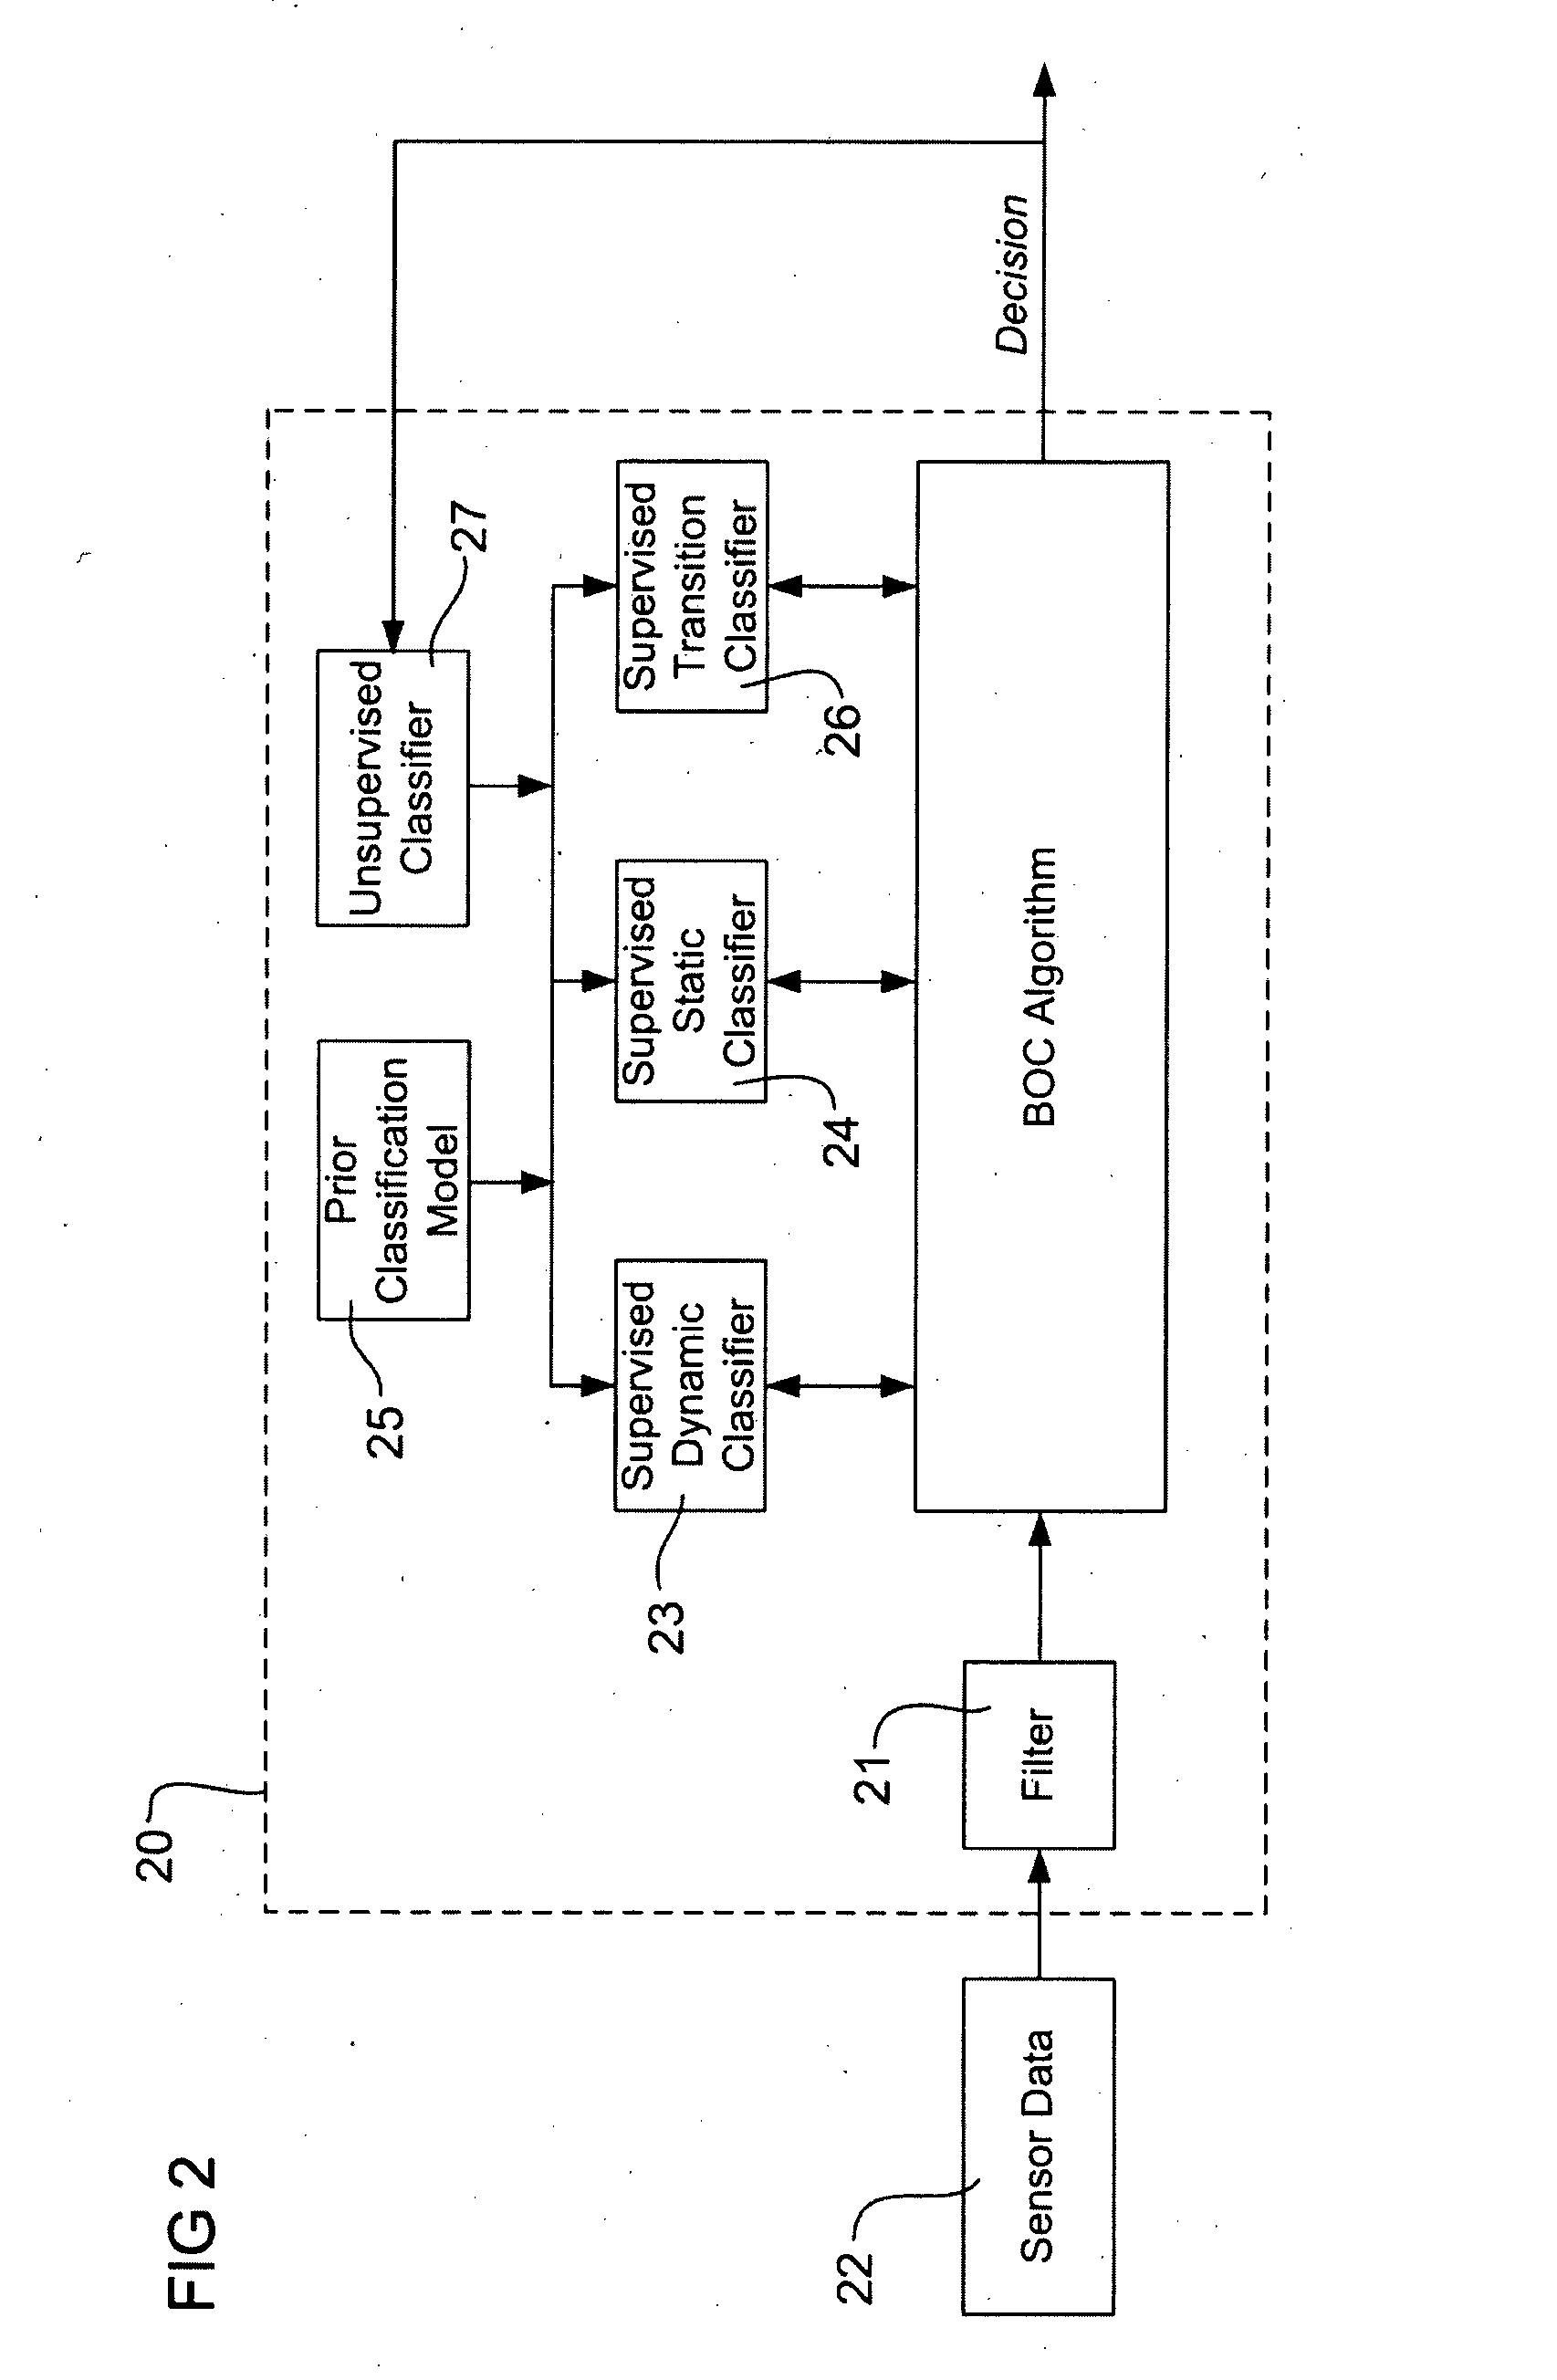 Apparatus and method for classifying orientation of a body of a mammal